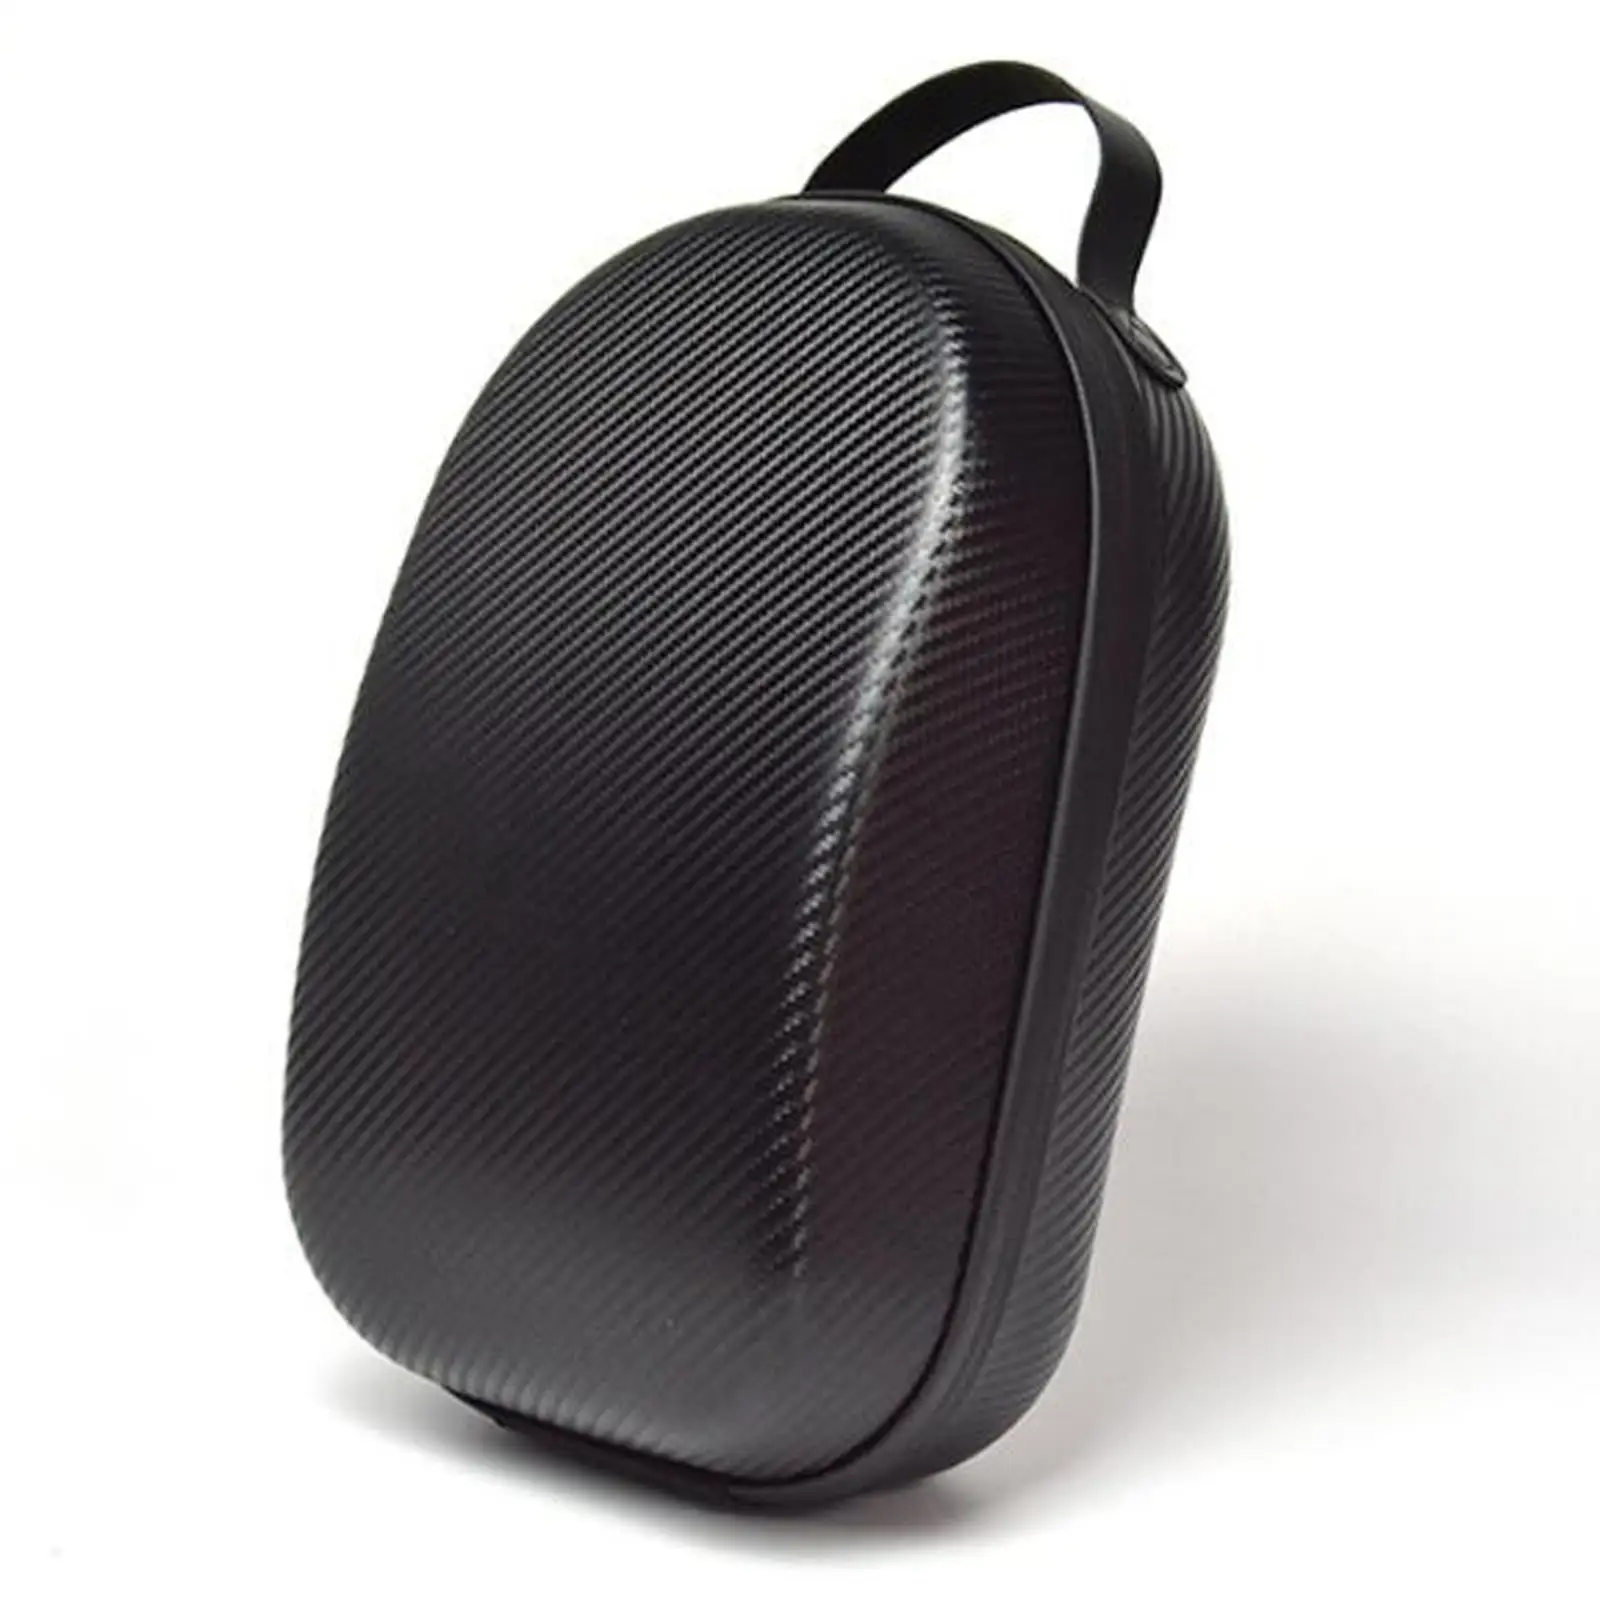 Travel Carrying Case, Protection Case Organizer for Quest 2 Headset Travel and Home